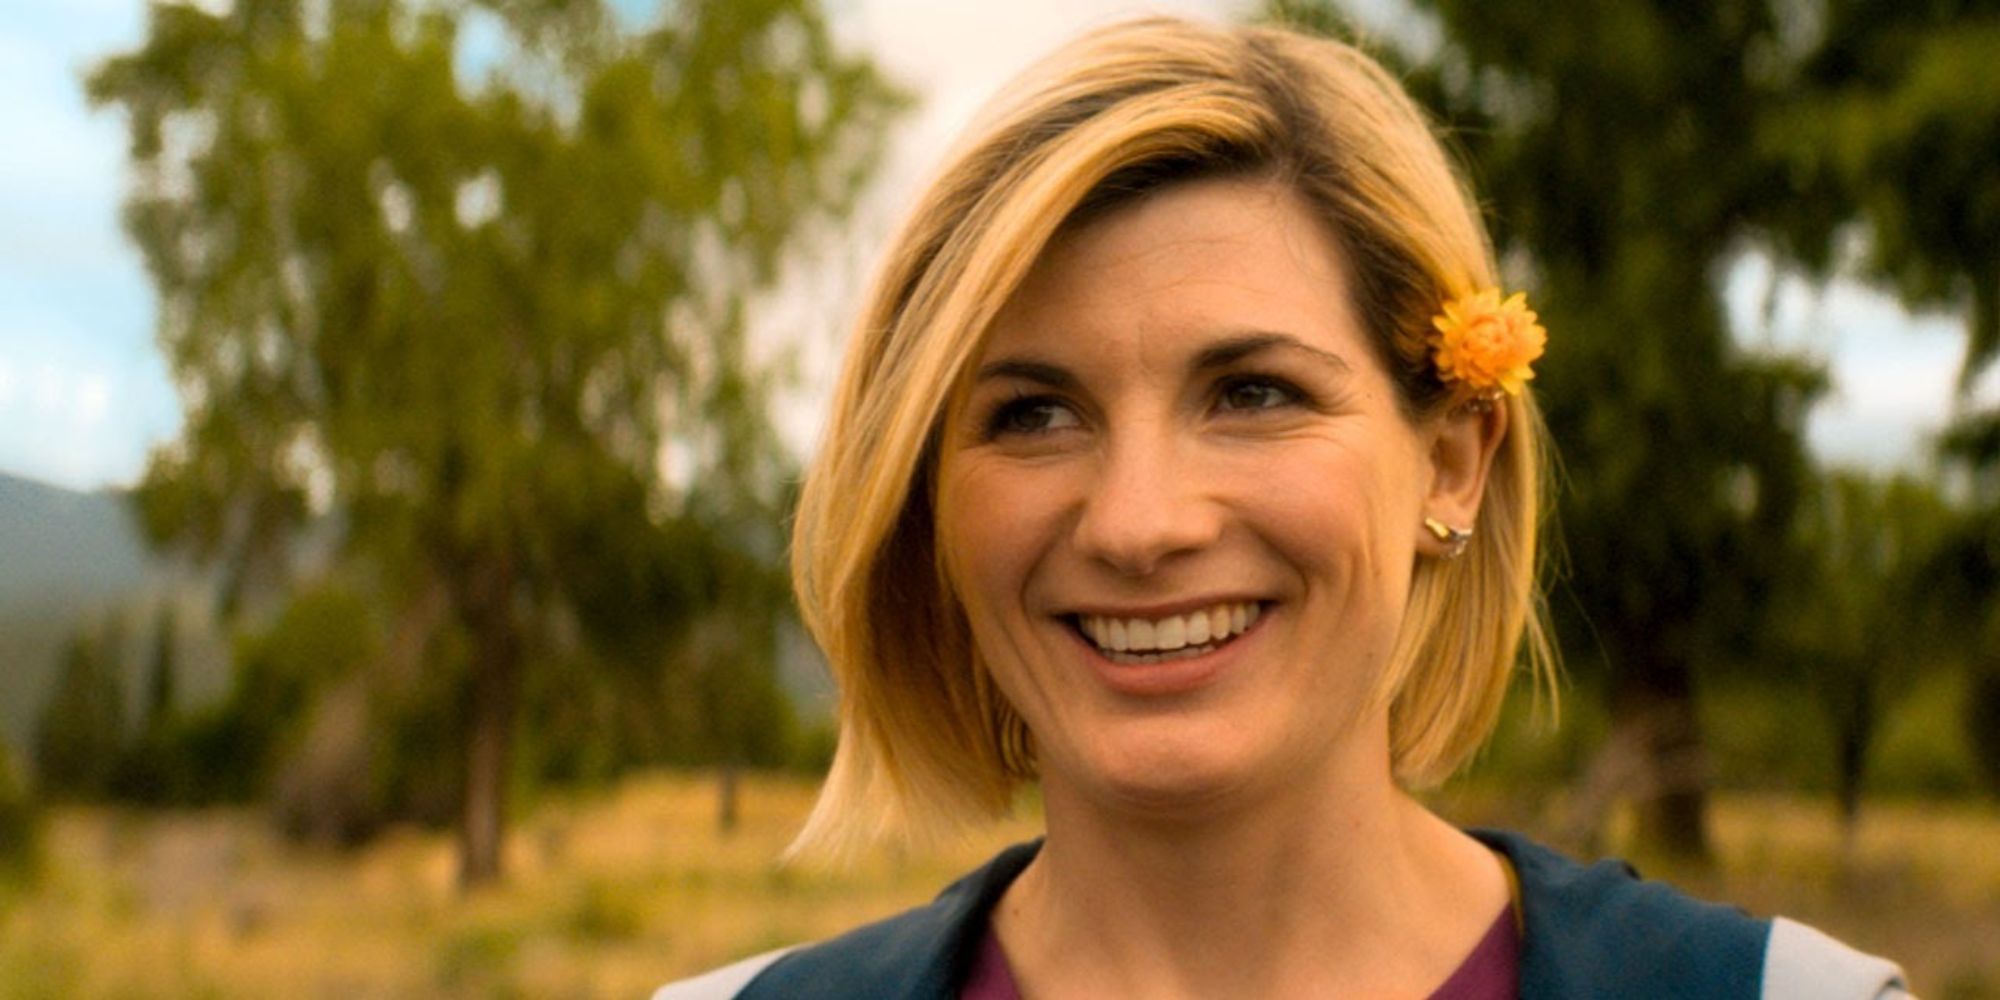 Jodie Whittaker playing the Thirteenth Doctor with a flower in her hair smiling in grasslands